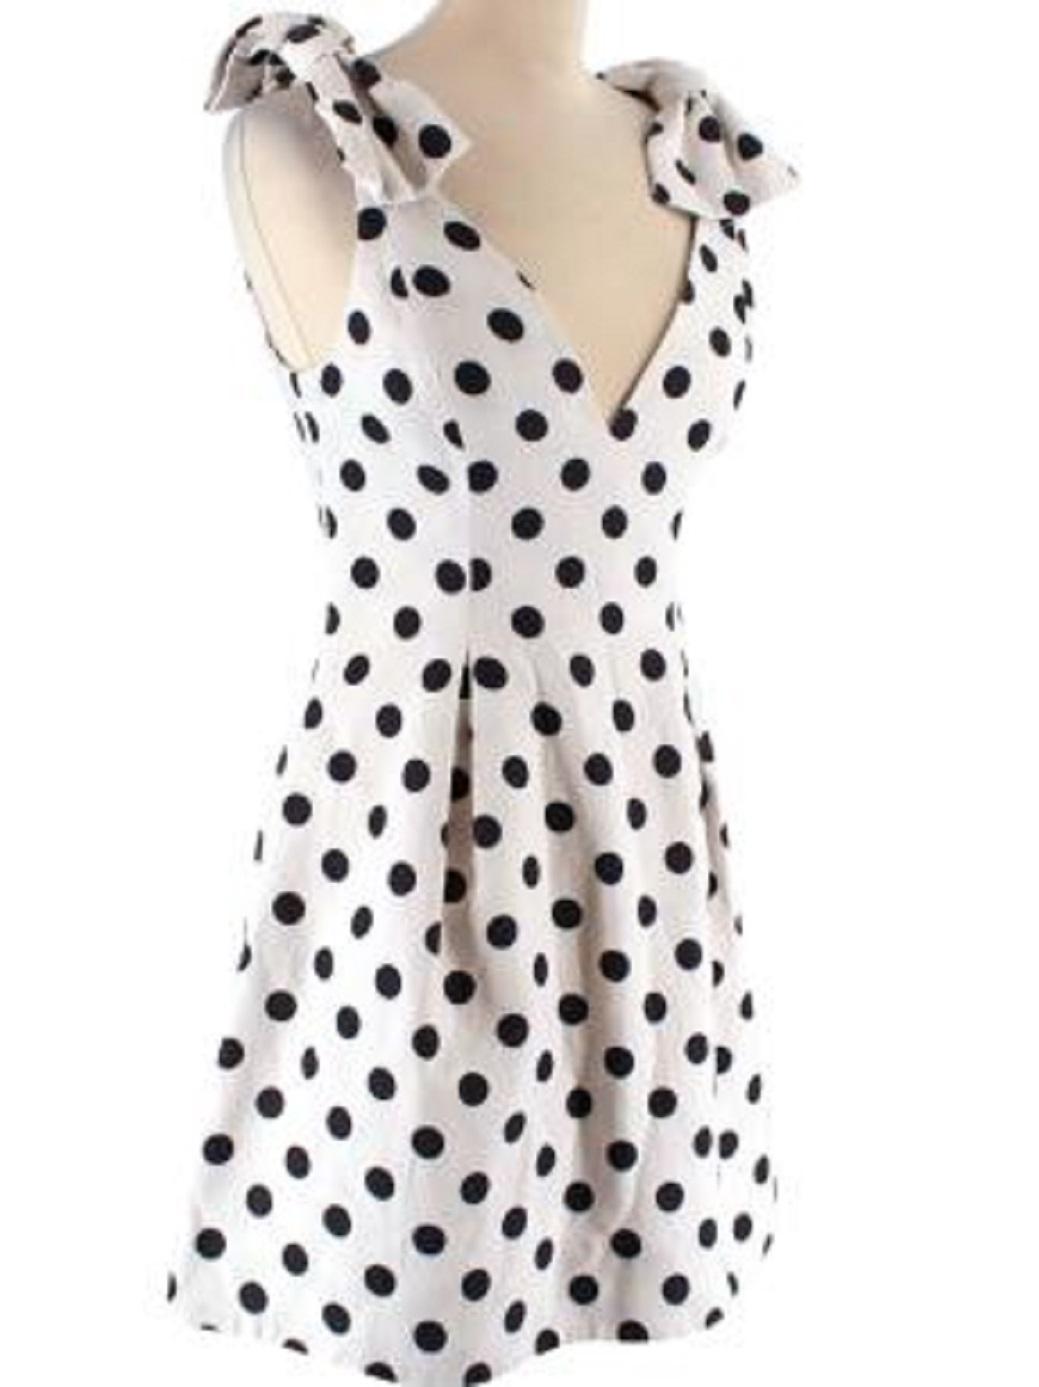 Zimmermann Black and White Polka Dot Linen Mini Dress

- Mid weight 
- All over polka dot pattern 
- Oversized bow shoulder detail 
- V neckline 
- Fitted body with A line skirt 
- Fully lined with white silk
- Back zip